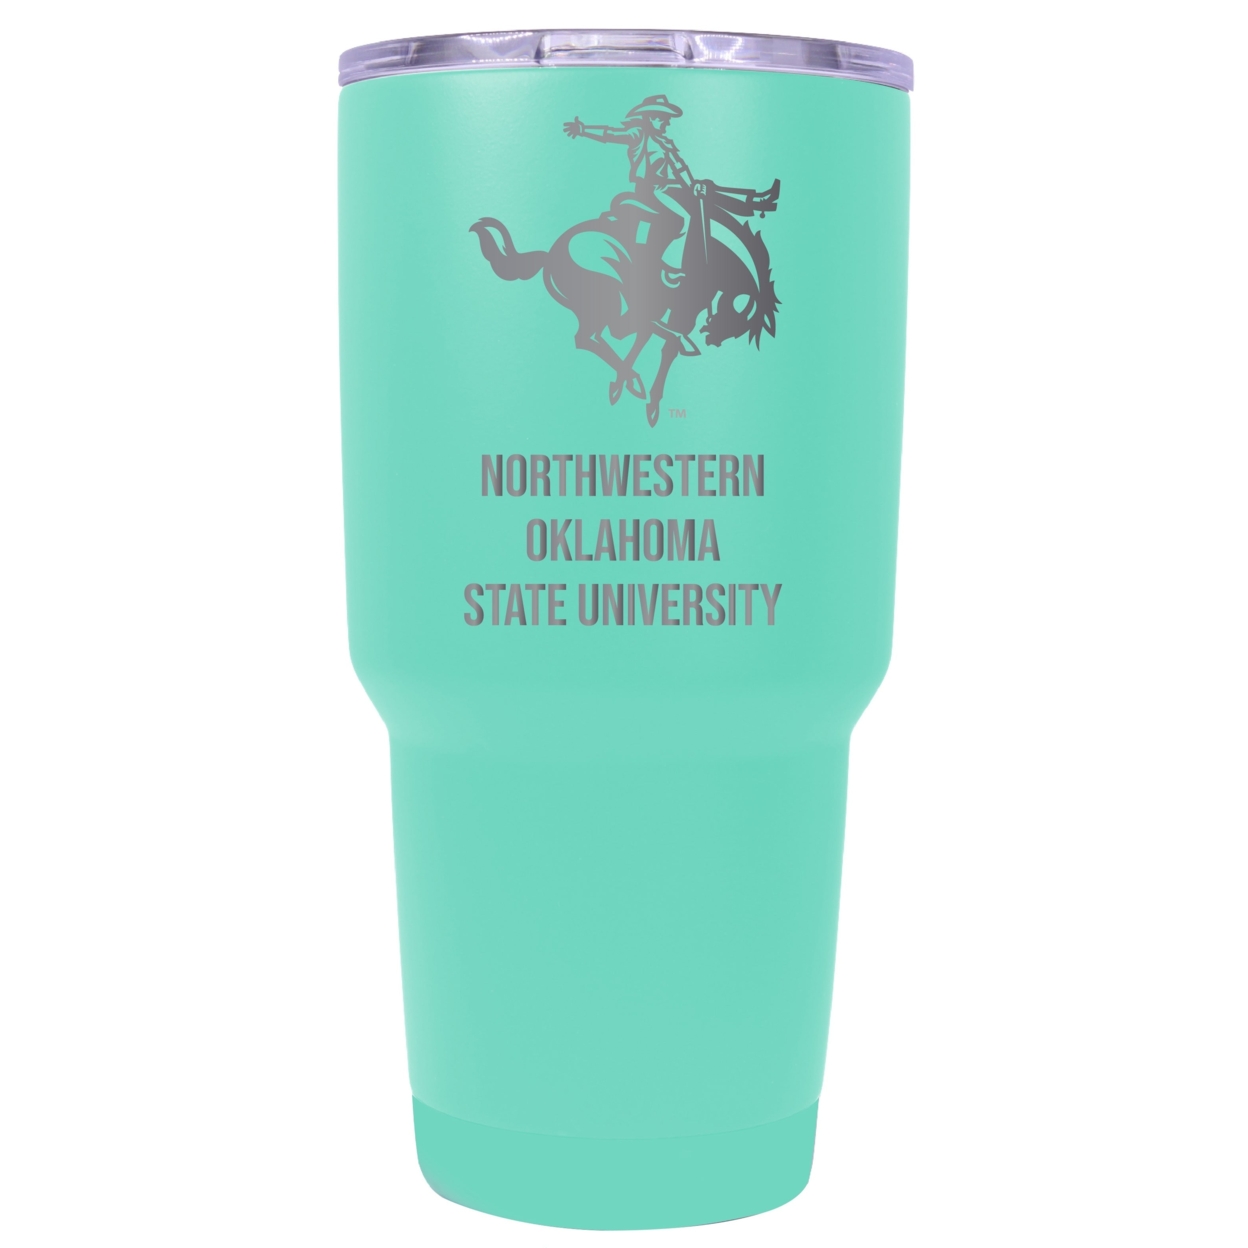 Northwestern Oklahoma State University 24 Oz Laser Engraved Stainless Steel Insulated Tumbler - Choose Your Color. - Seafoam